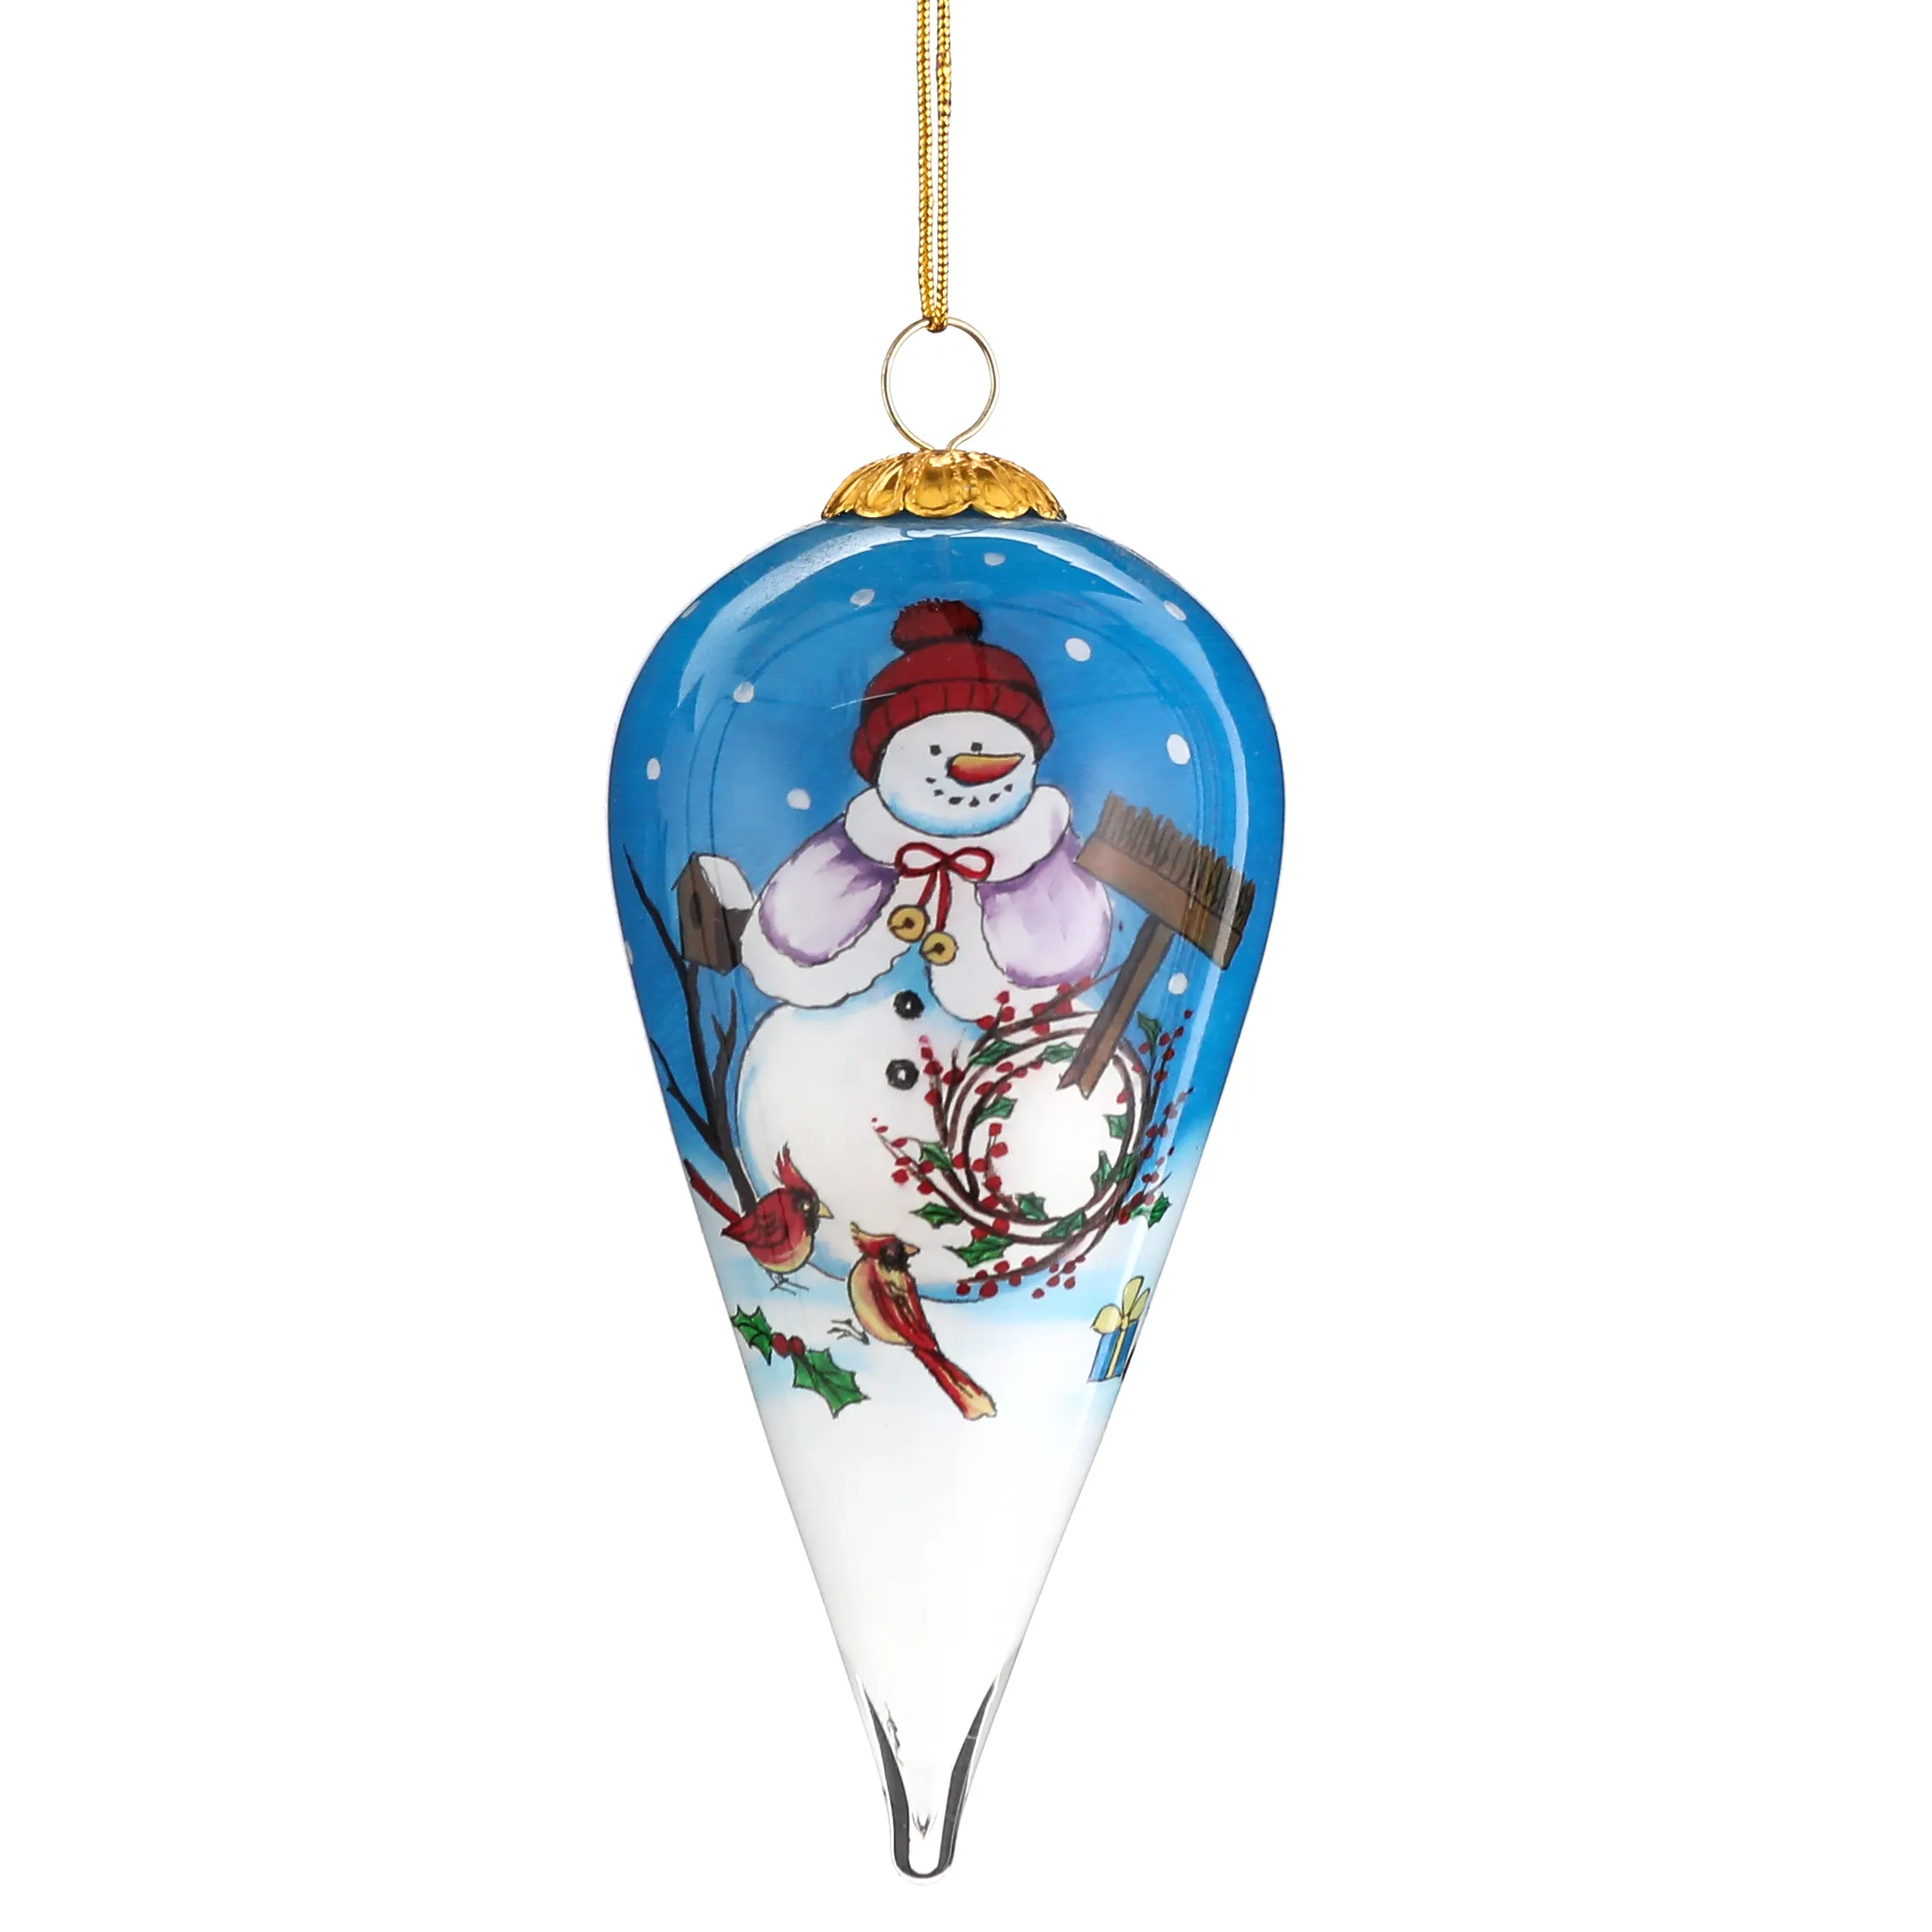 Factory customized hot sale glass hand-painted interior painted Christmas balls gift shop for Christmas commemorative gifts